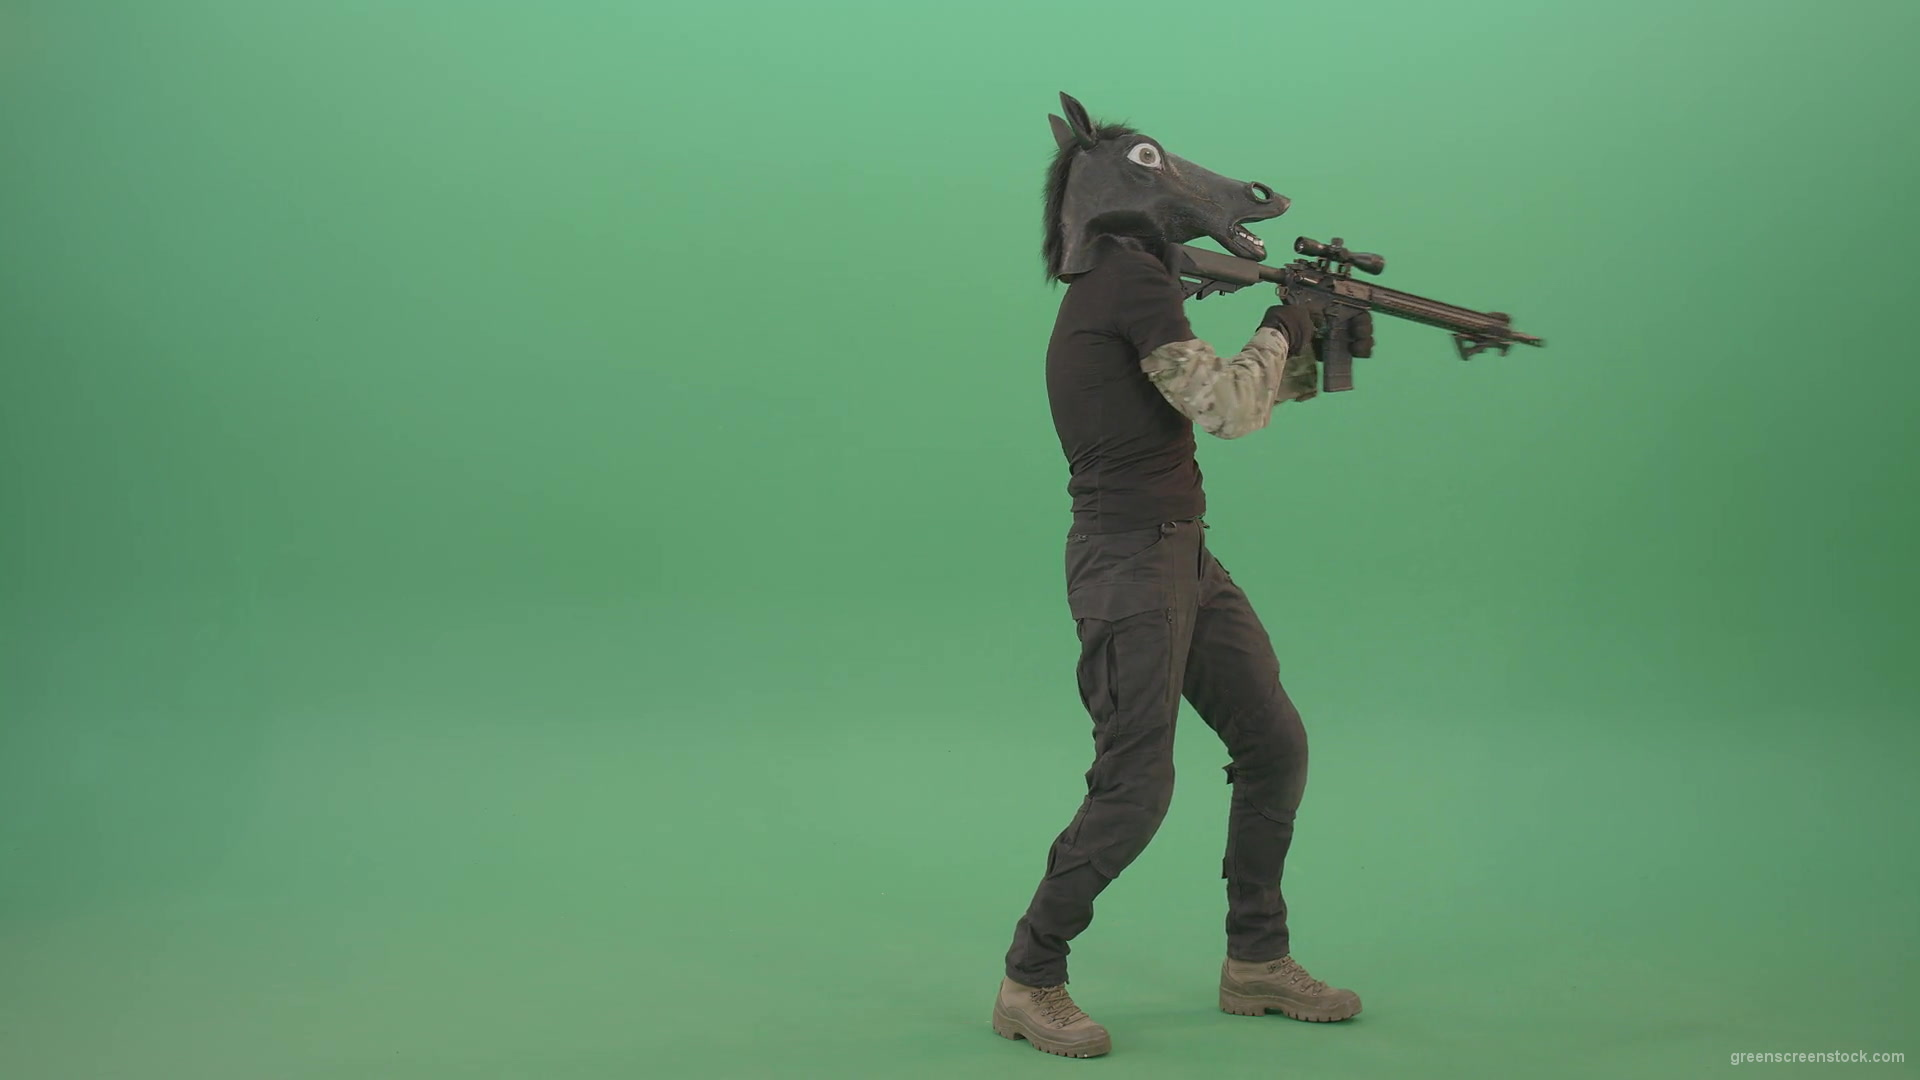 Front-view-Army-Man-in-horse-mask-shooting-from-Machine-Gun-isolated-on-Chromakey-Green-Screen-4K-Video-Footage-1920_007 Green Screen Stock